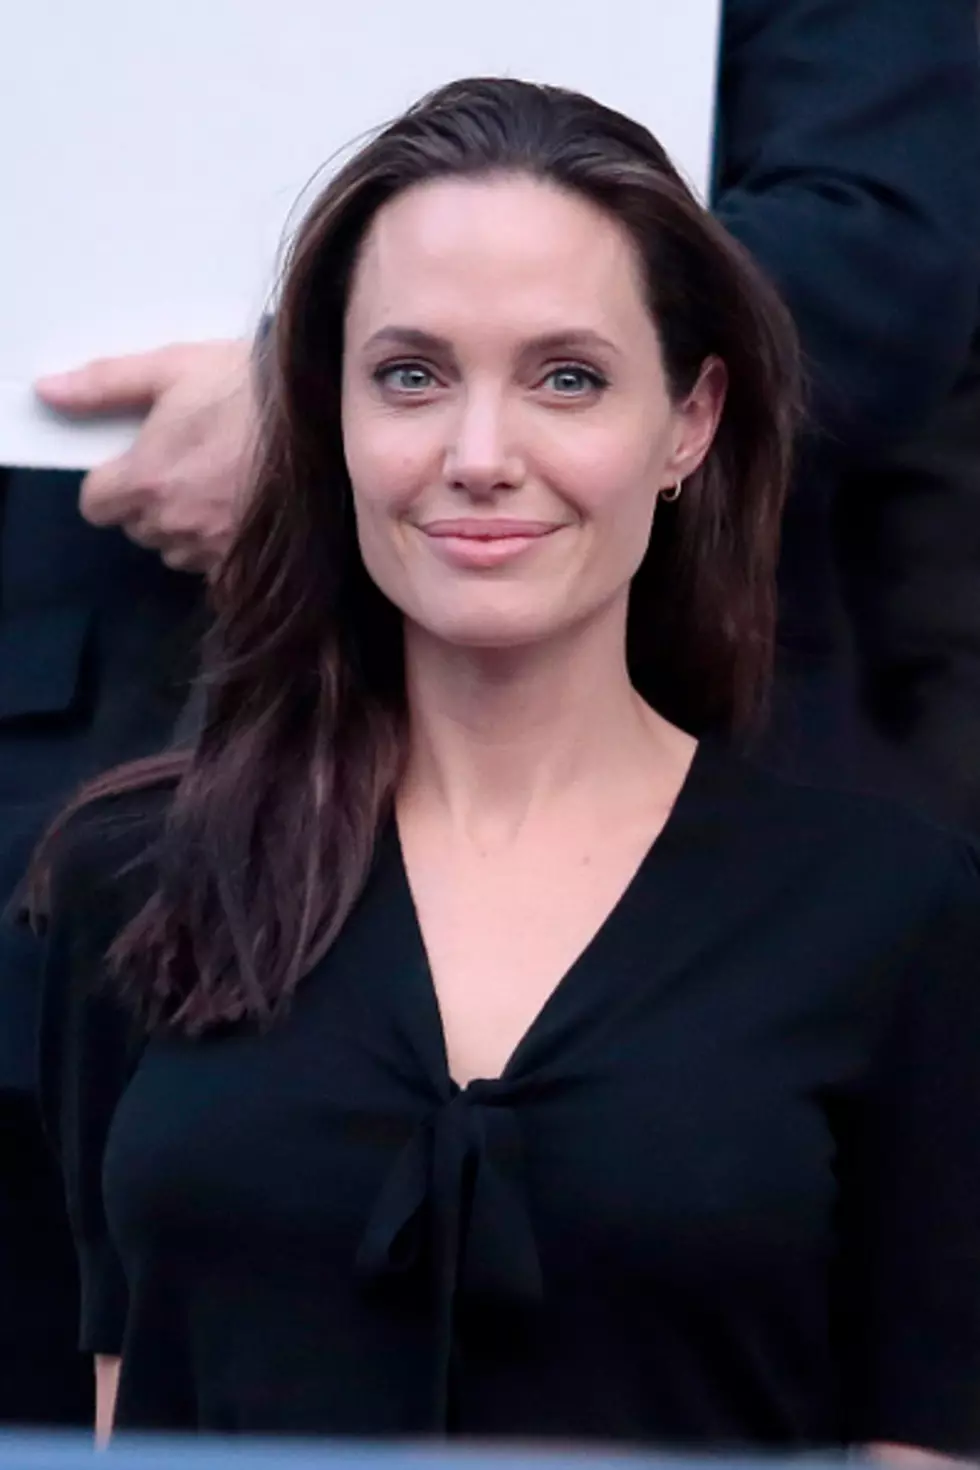 Teddy Bear Sellers Fail to Recognize the Hotness That Is Angelina Jolie